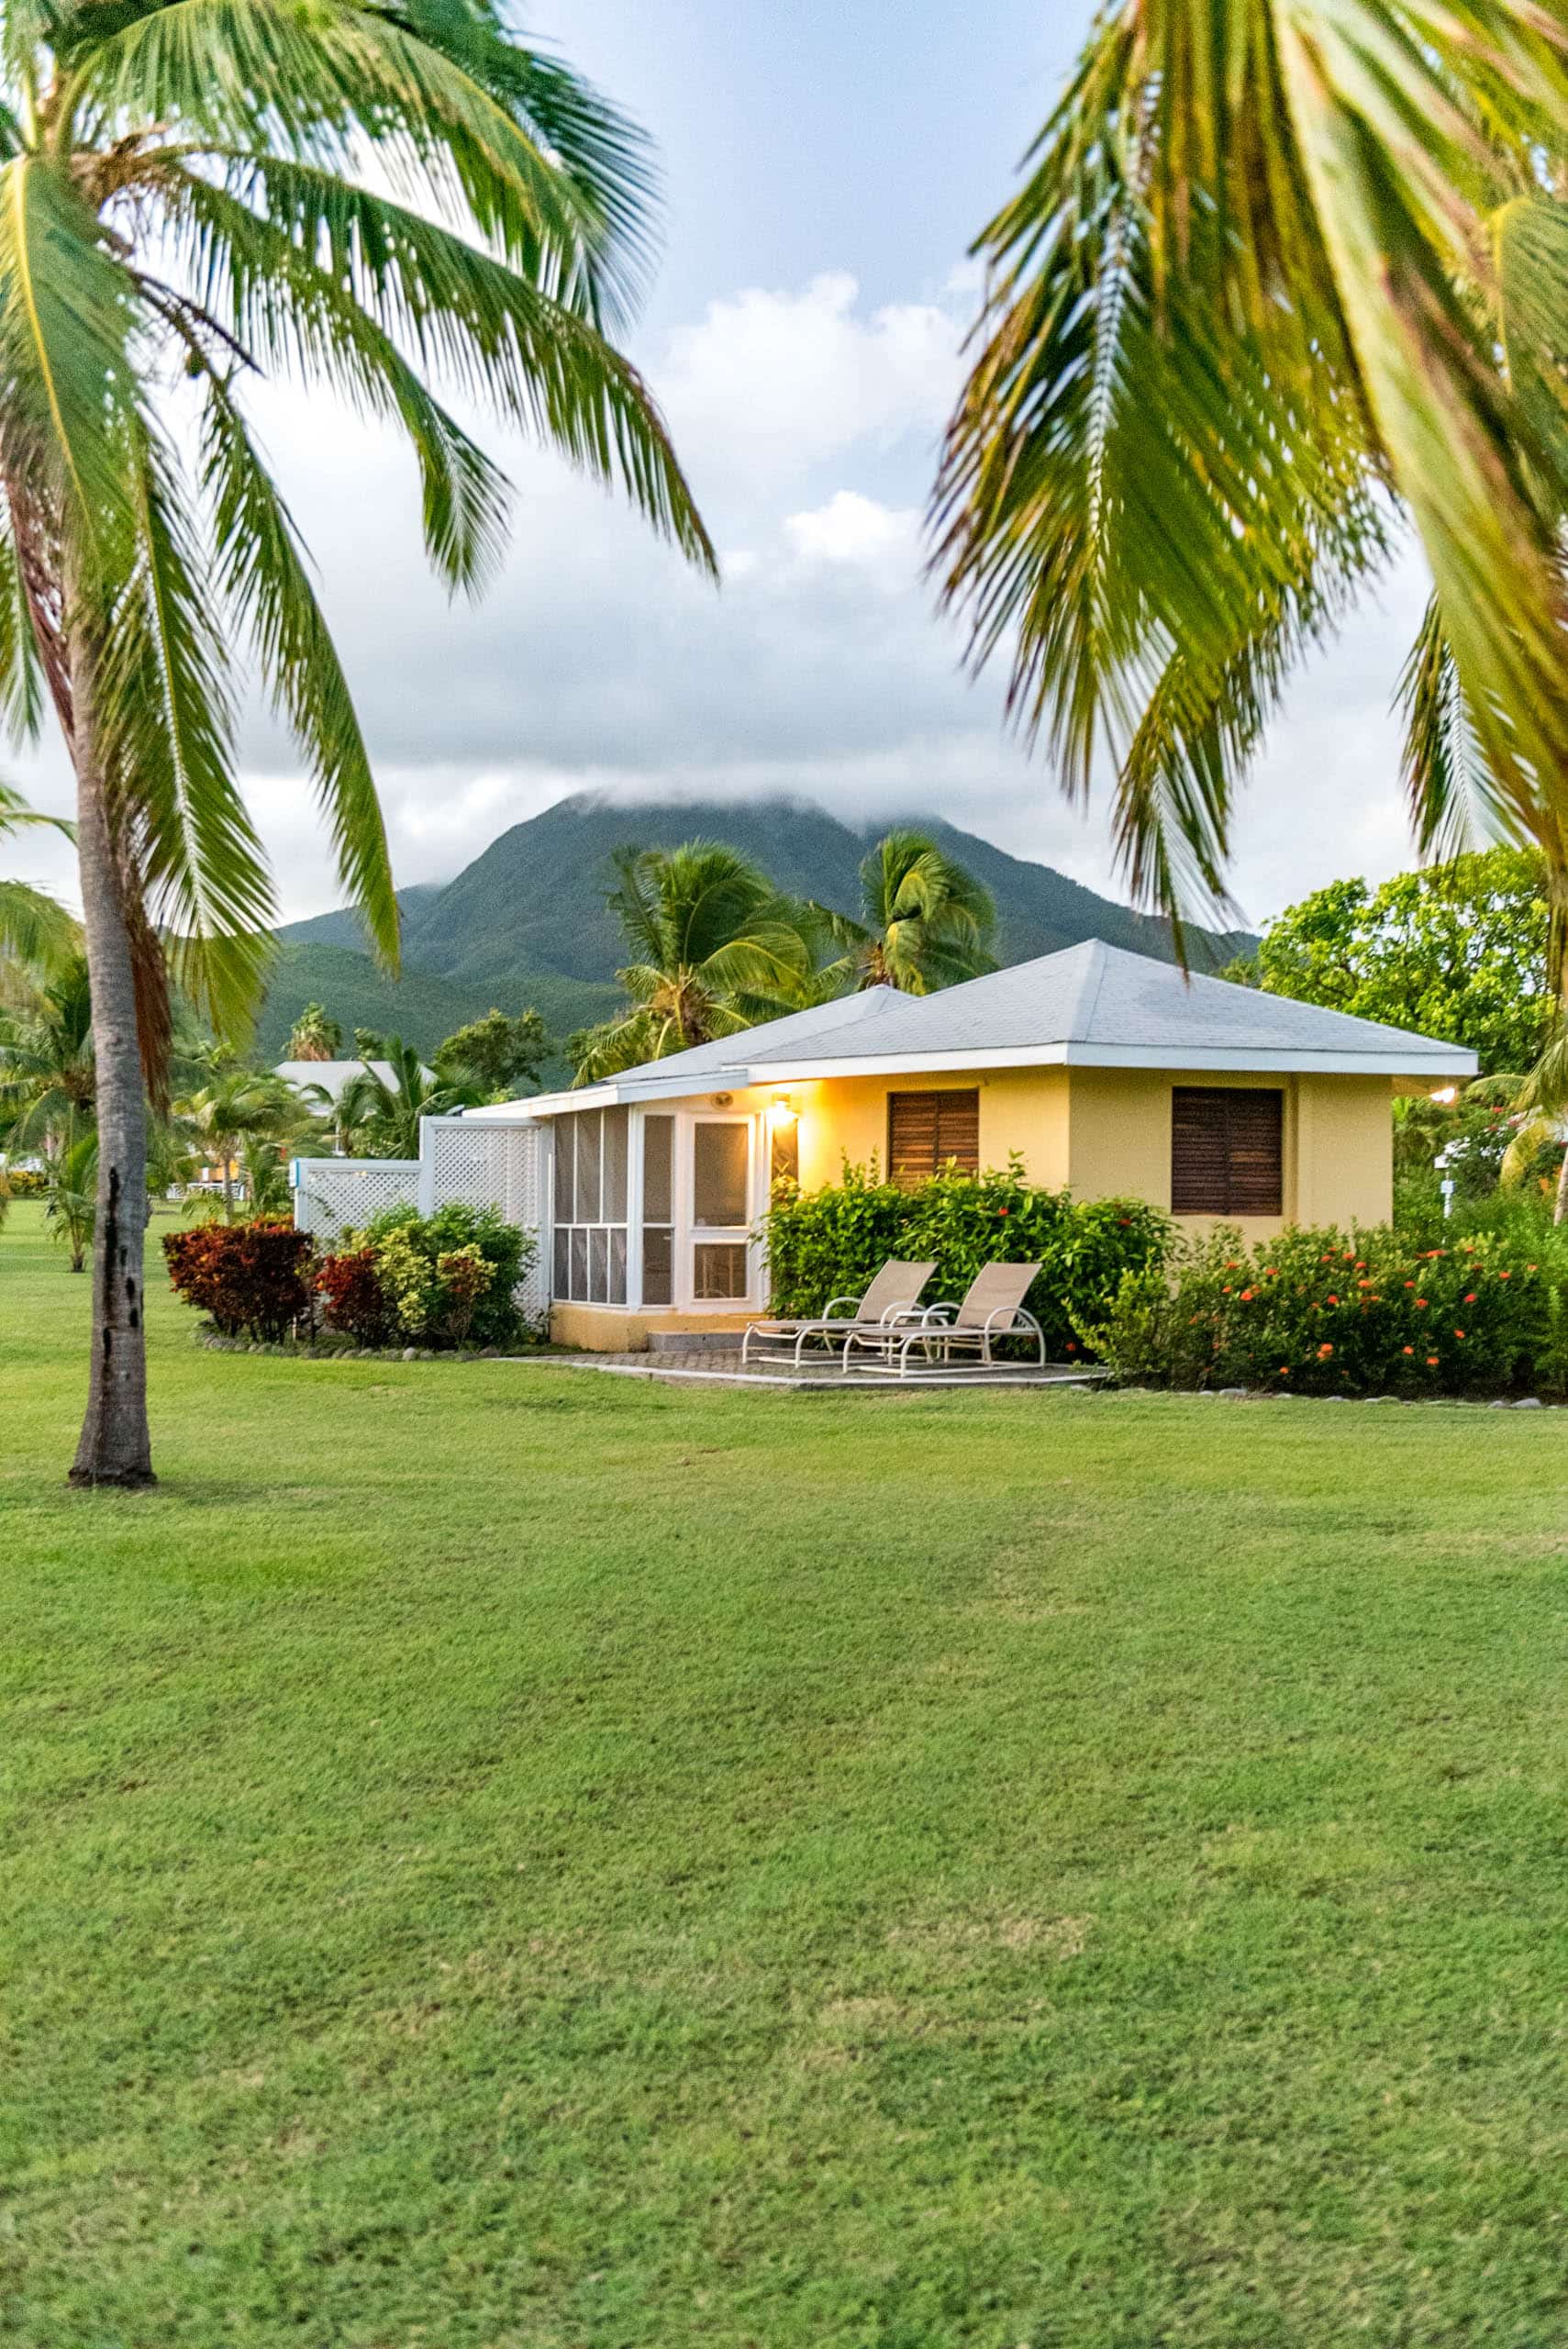 Get wrapped in casual Caribbean luxury at their 36 cottages.